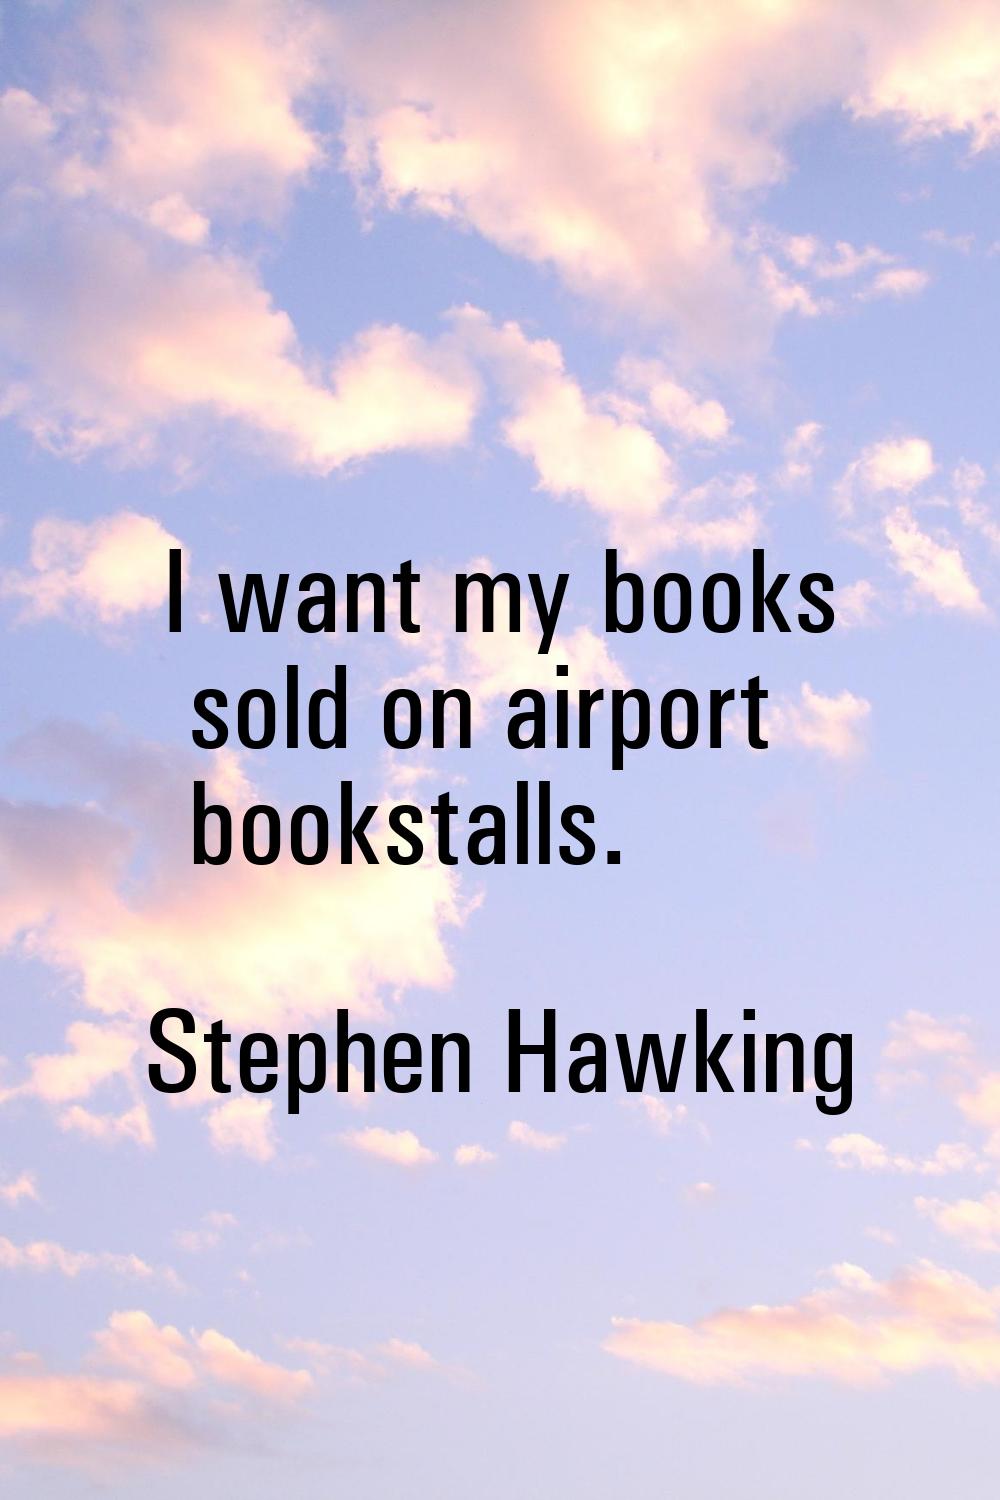 I want my books sold on airport bookstalls.